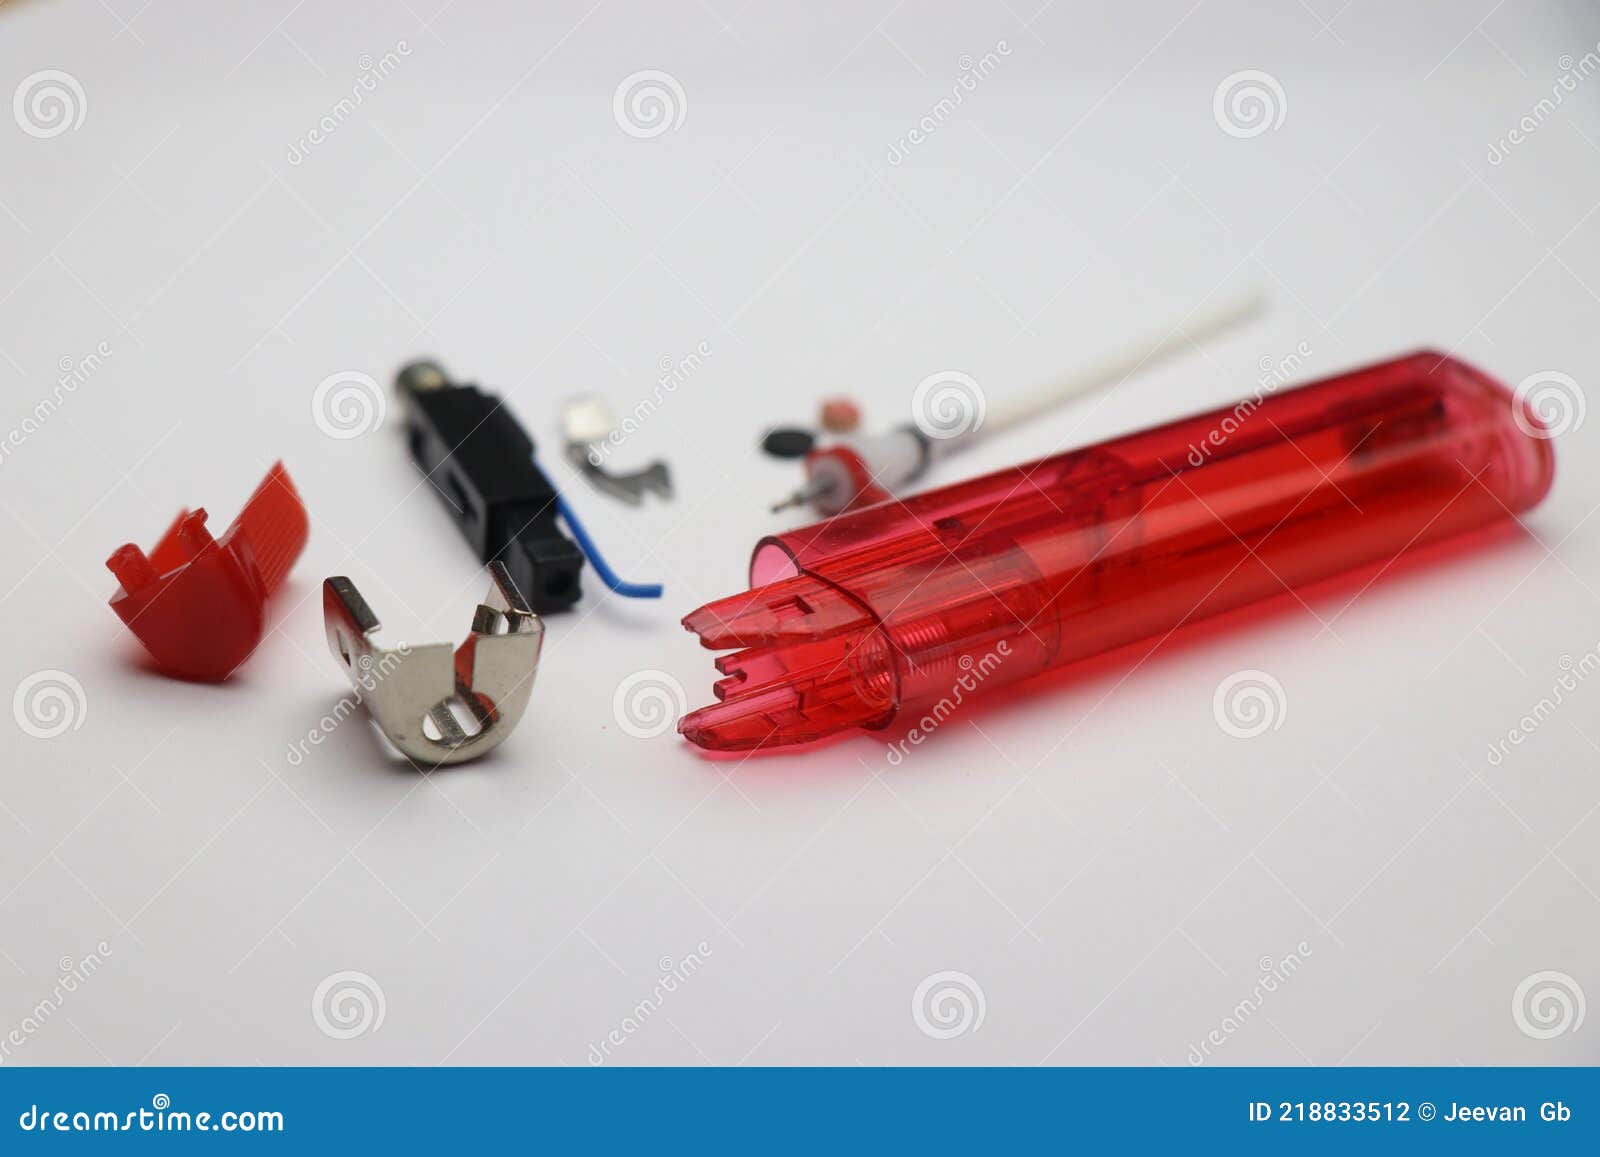 Disassembled View of Cigarette Lighter with Electronic Ignitor, Tank, Wick, Cap and Other Parts Isolated White Background Stock Photo - Image of plastic, lighter: 218833512